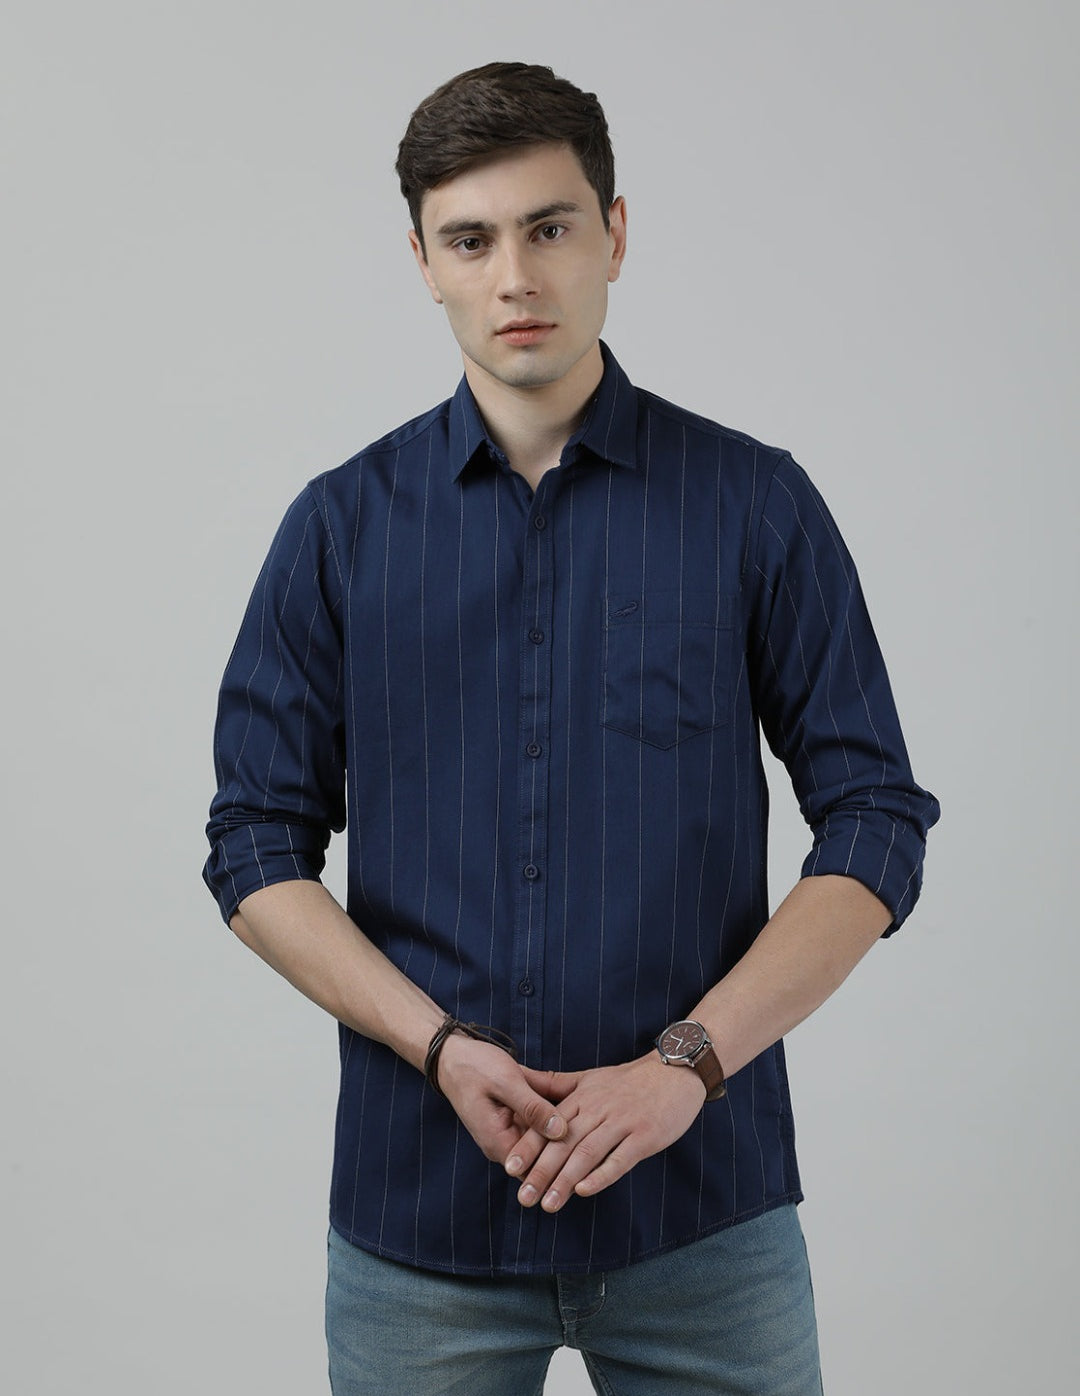 Casual Navy Full Sleeve Slim Fit Stripe Shirt with Collar for Men